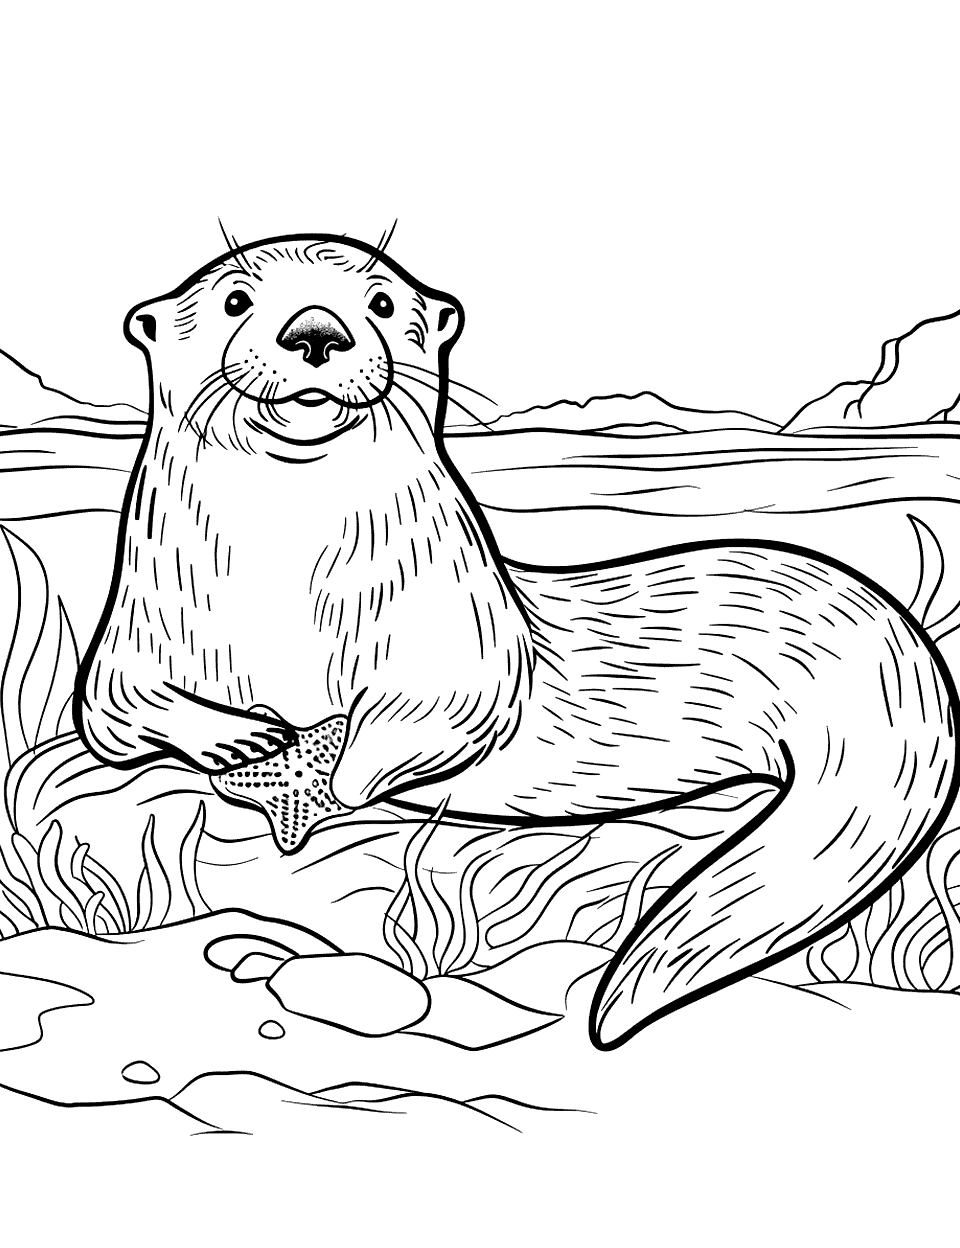 Sea Otter Floating on Back Coloring Page - A sea otter lying on its back in the ocean, holding a starfish.